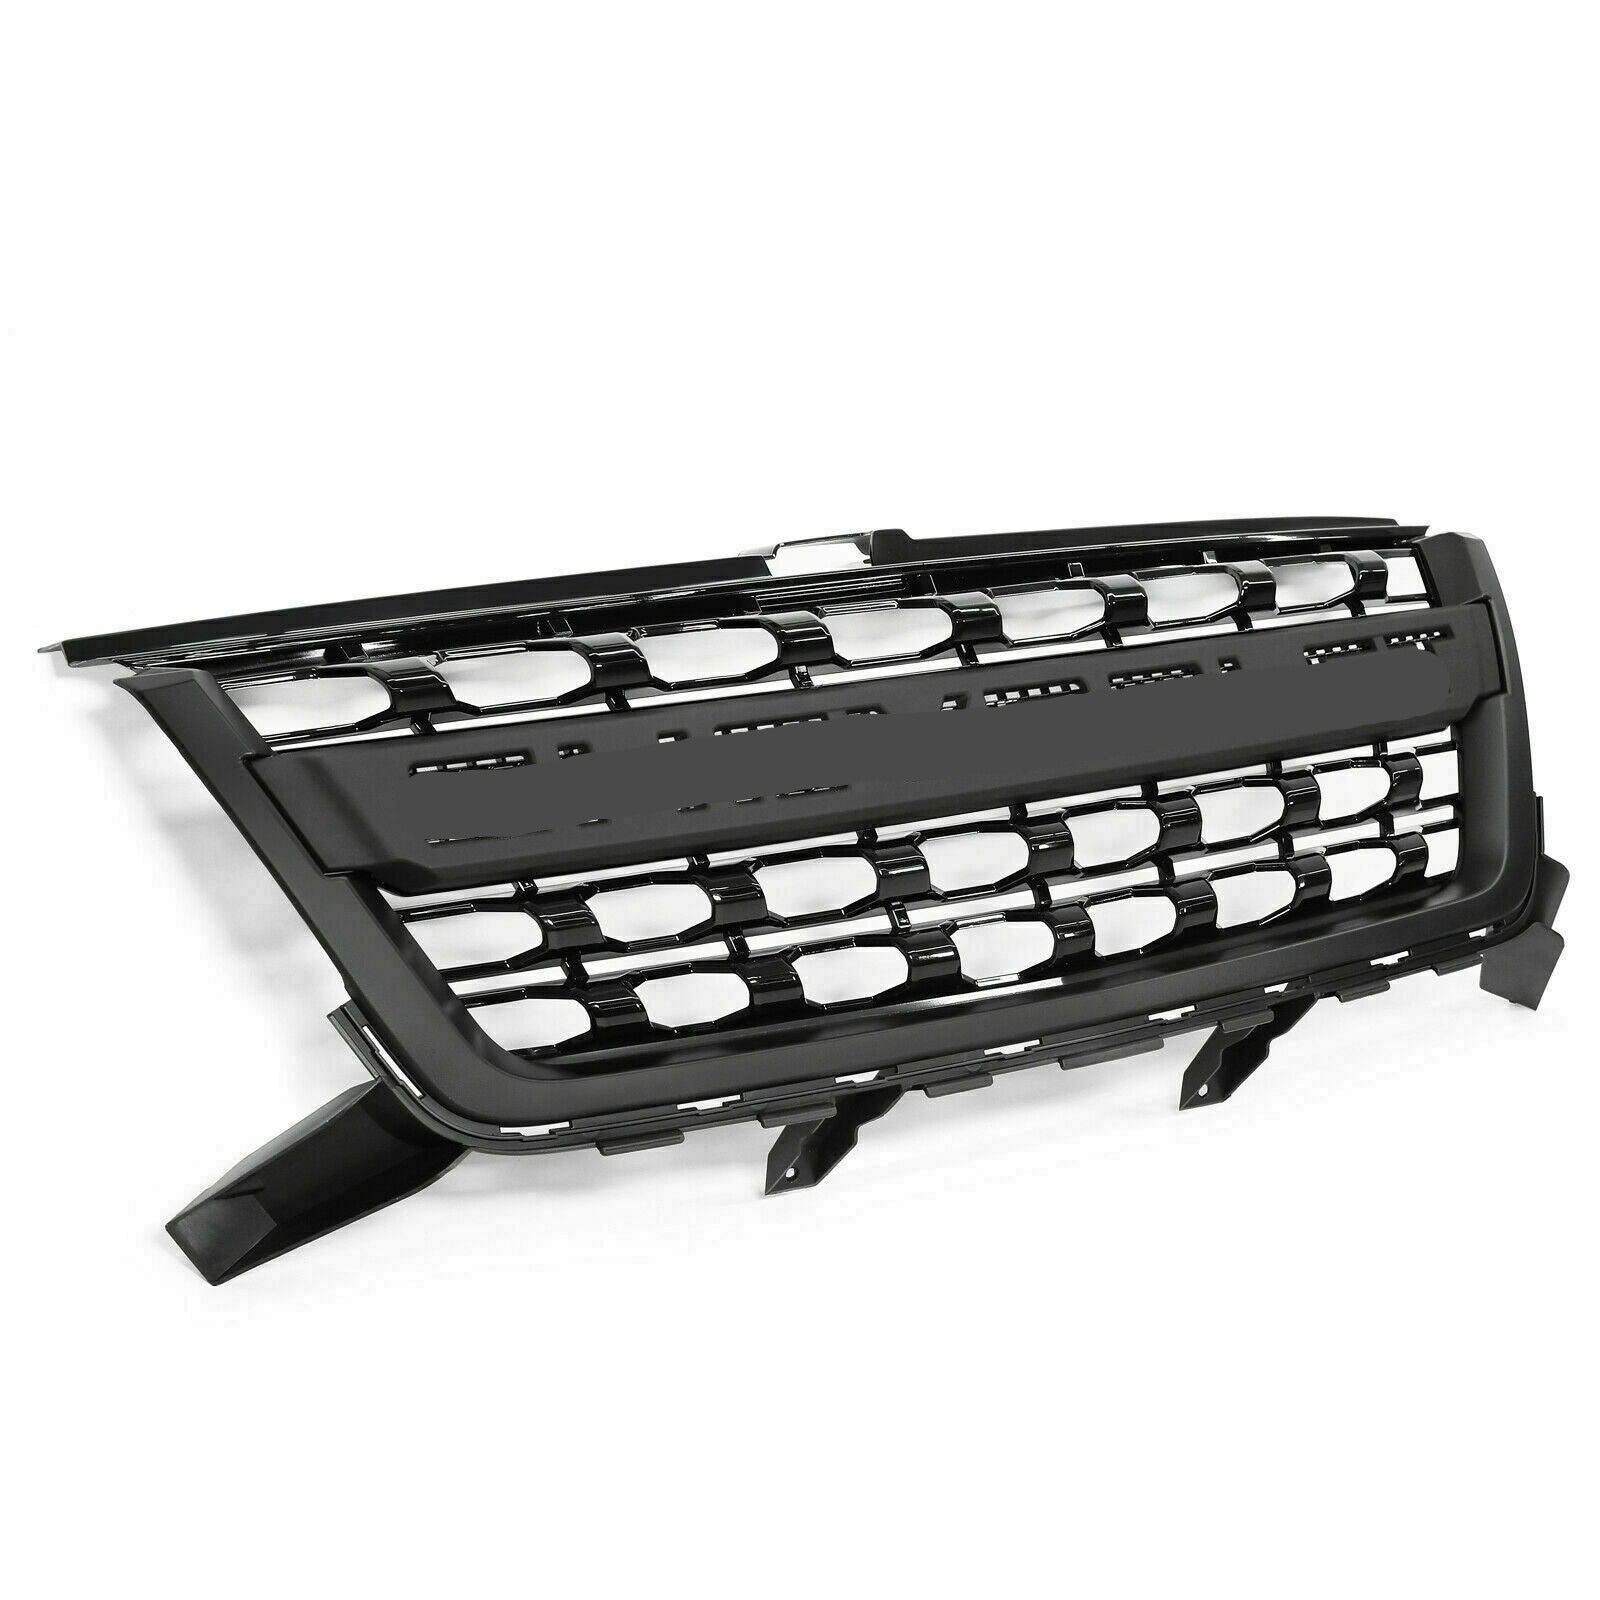 2020 – 2015 2016 Aftermark 2017 Front Chevy Colorado Grill Goodmatchup 2019 For 2018